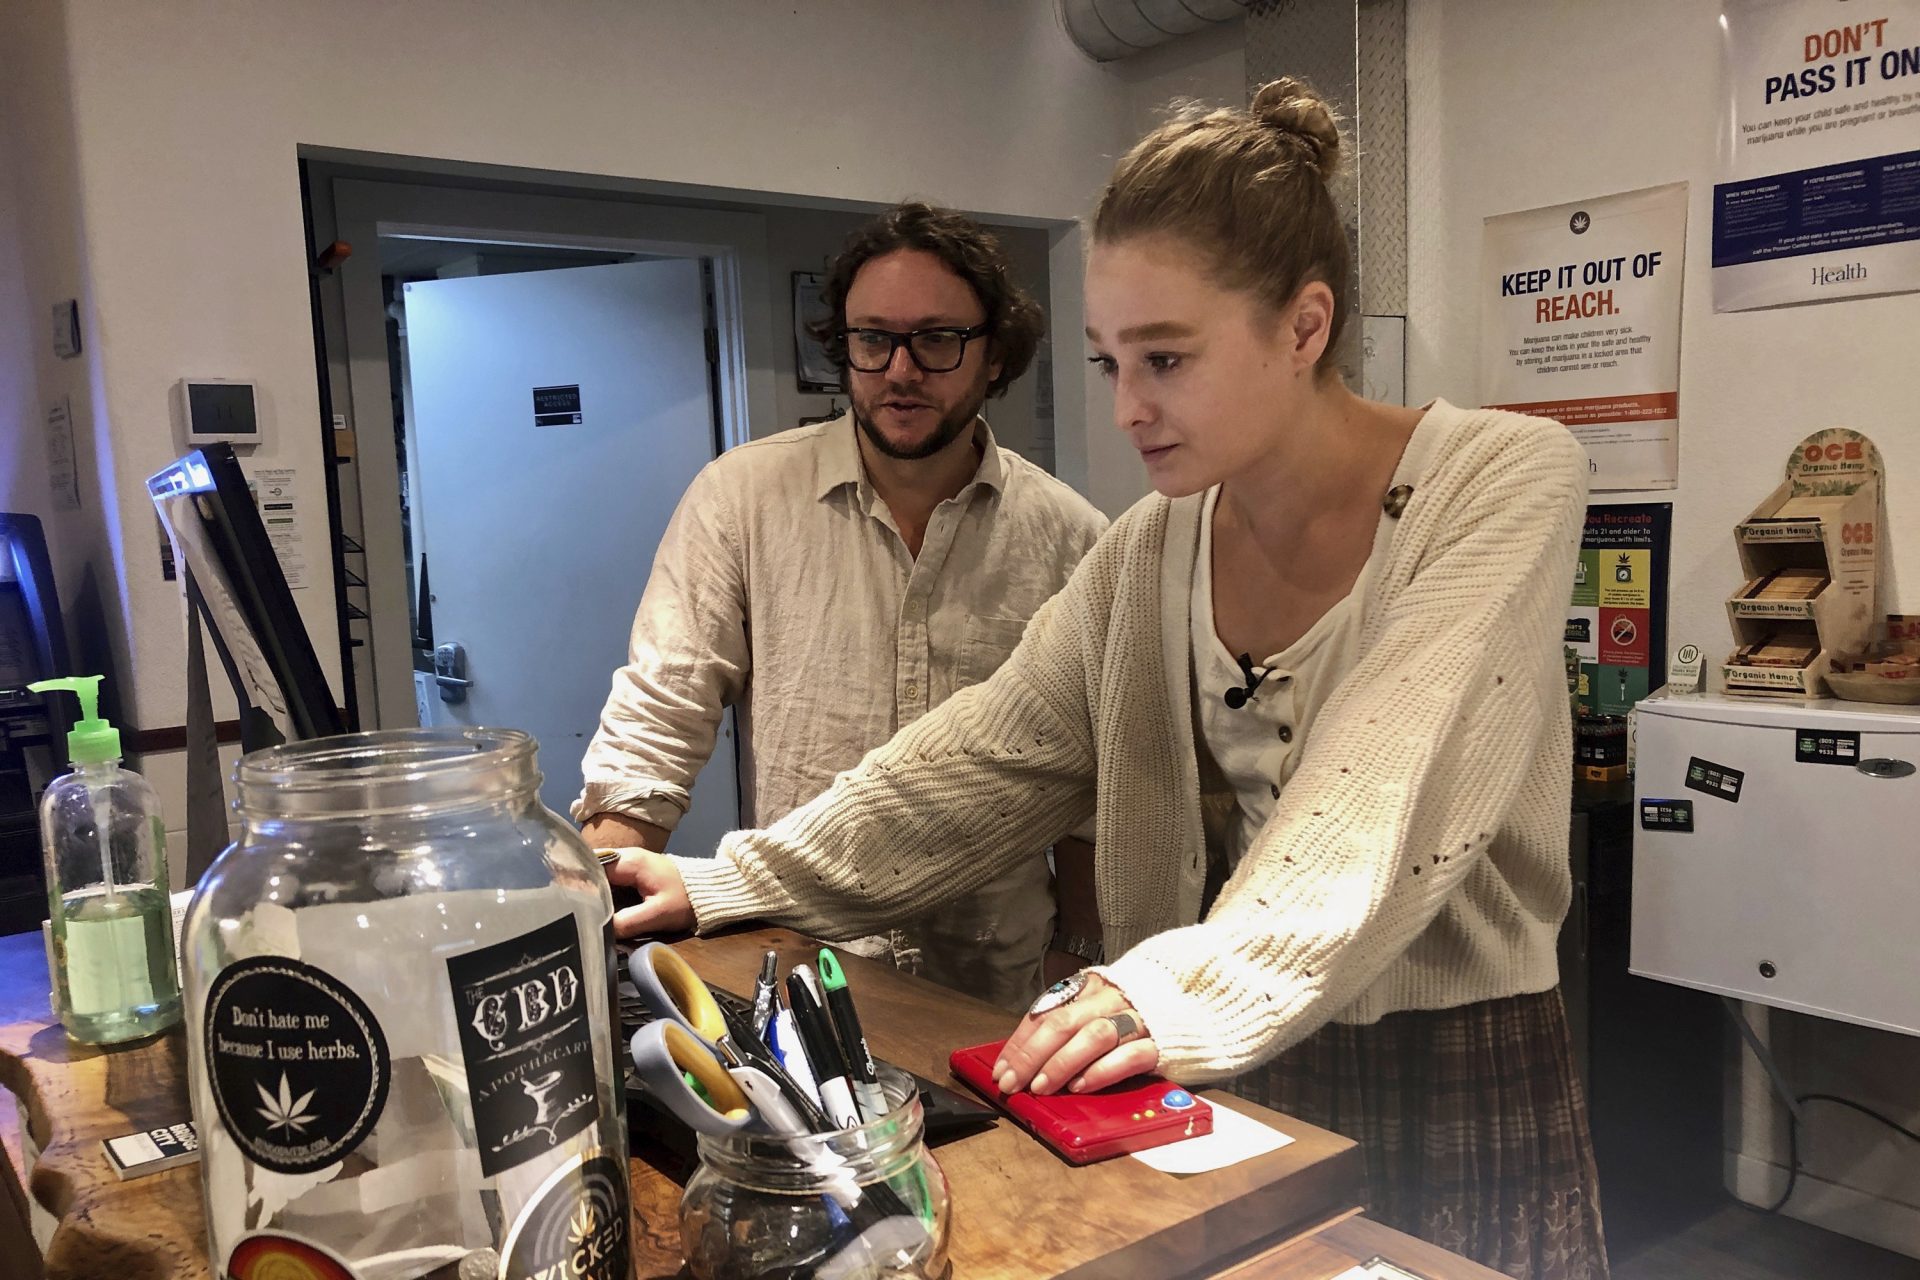 In this photo taken Sept. 20, 2019, David Alport, owner of the Bridge City Collective marijuana dispensary in Portland, Ore., goes over sales numbers with the store's general manager Cameron Moore. The company has seen a 31% decrease in its sales of vaping products in the past two weeks. “It’s having an impact on how consumers are behaving,” said Alport. “People are concerned, and we’re concerned.”